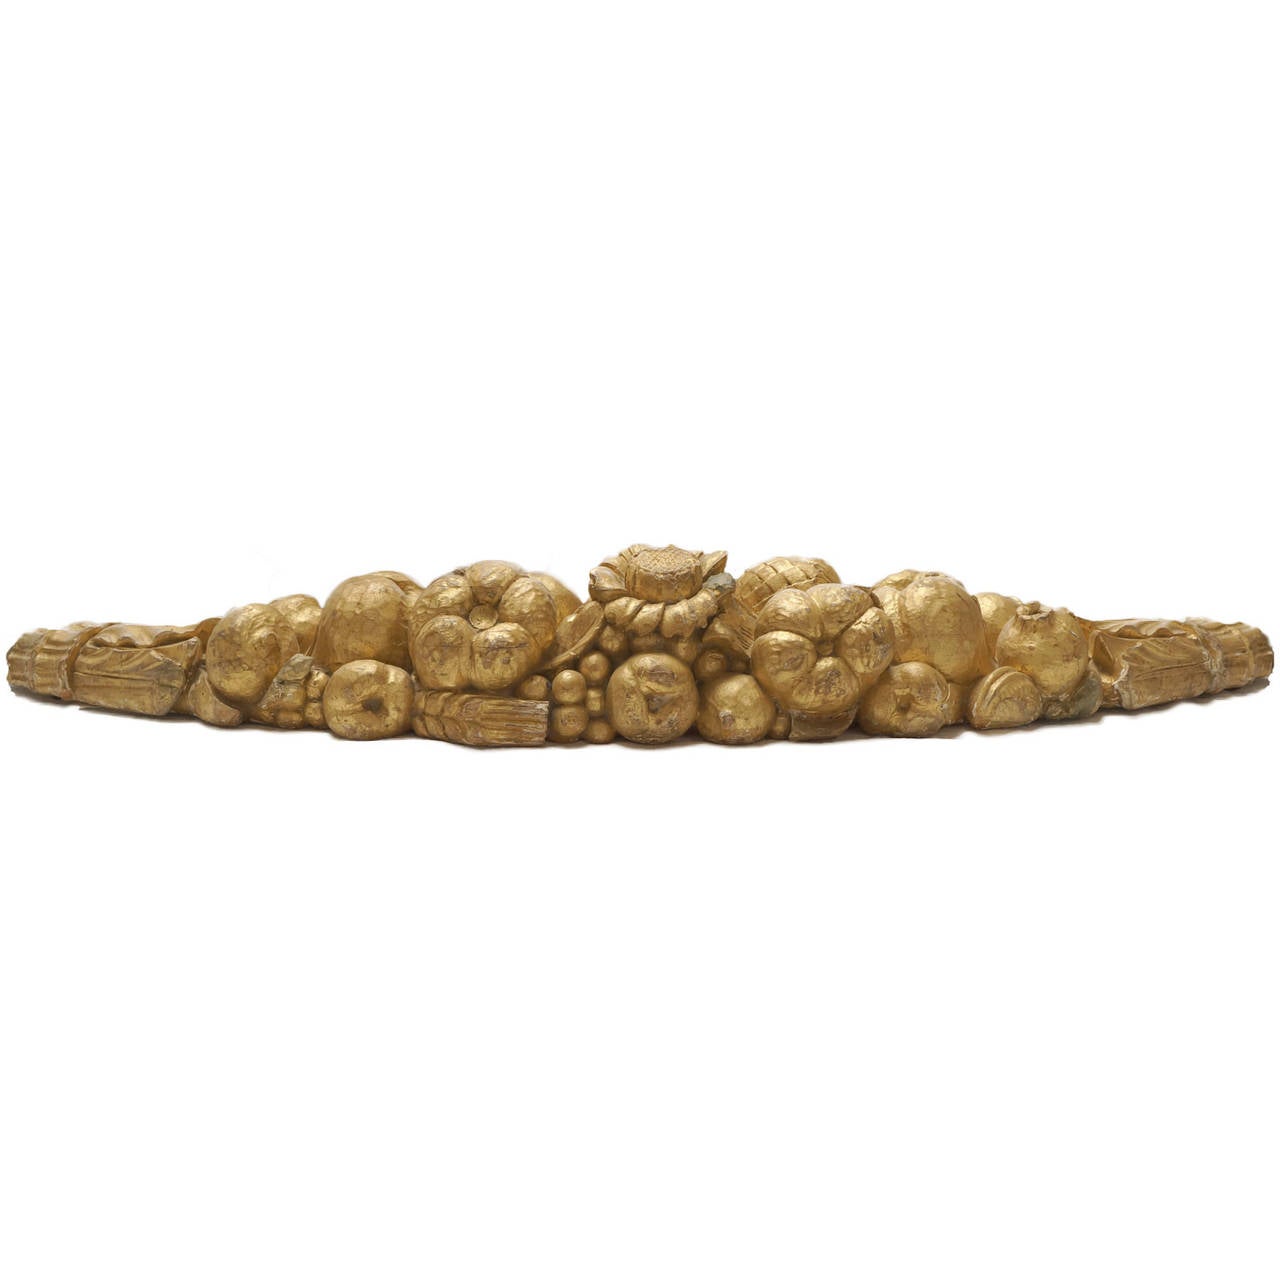 This Baroque style giltwood fruit and floral garland is hand-carved from one solid piece of wood. It is in excellent condition.